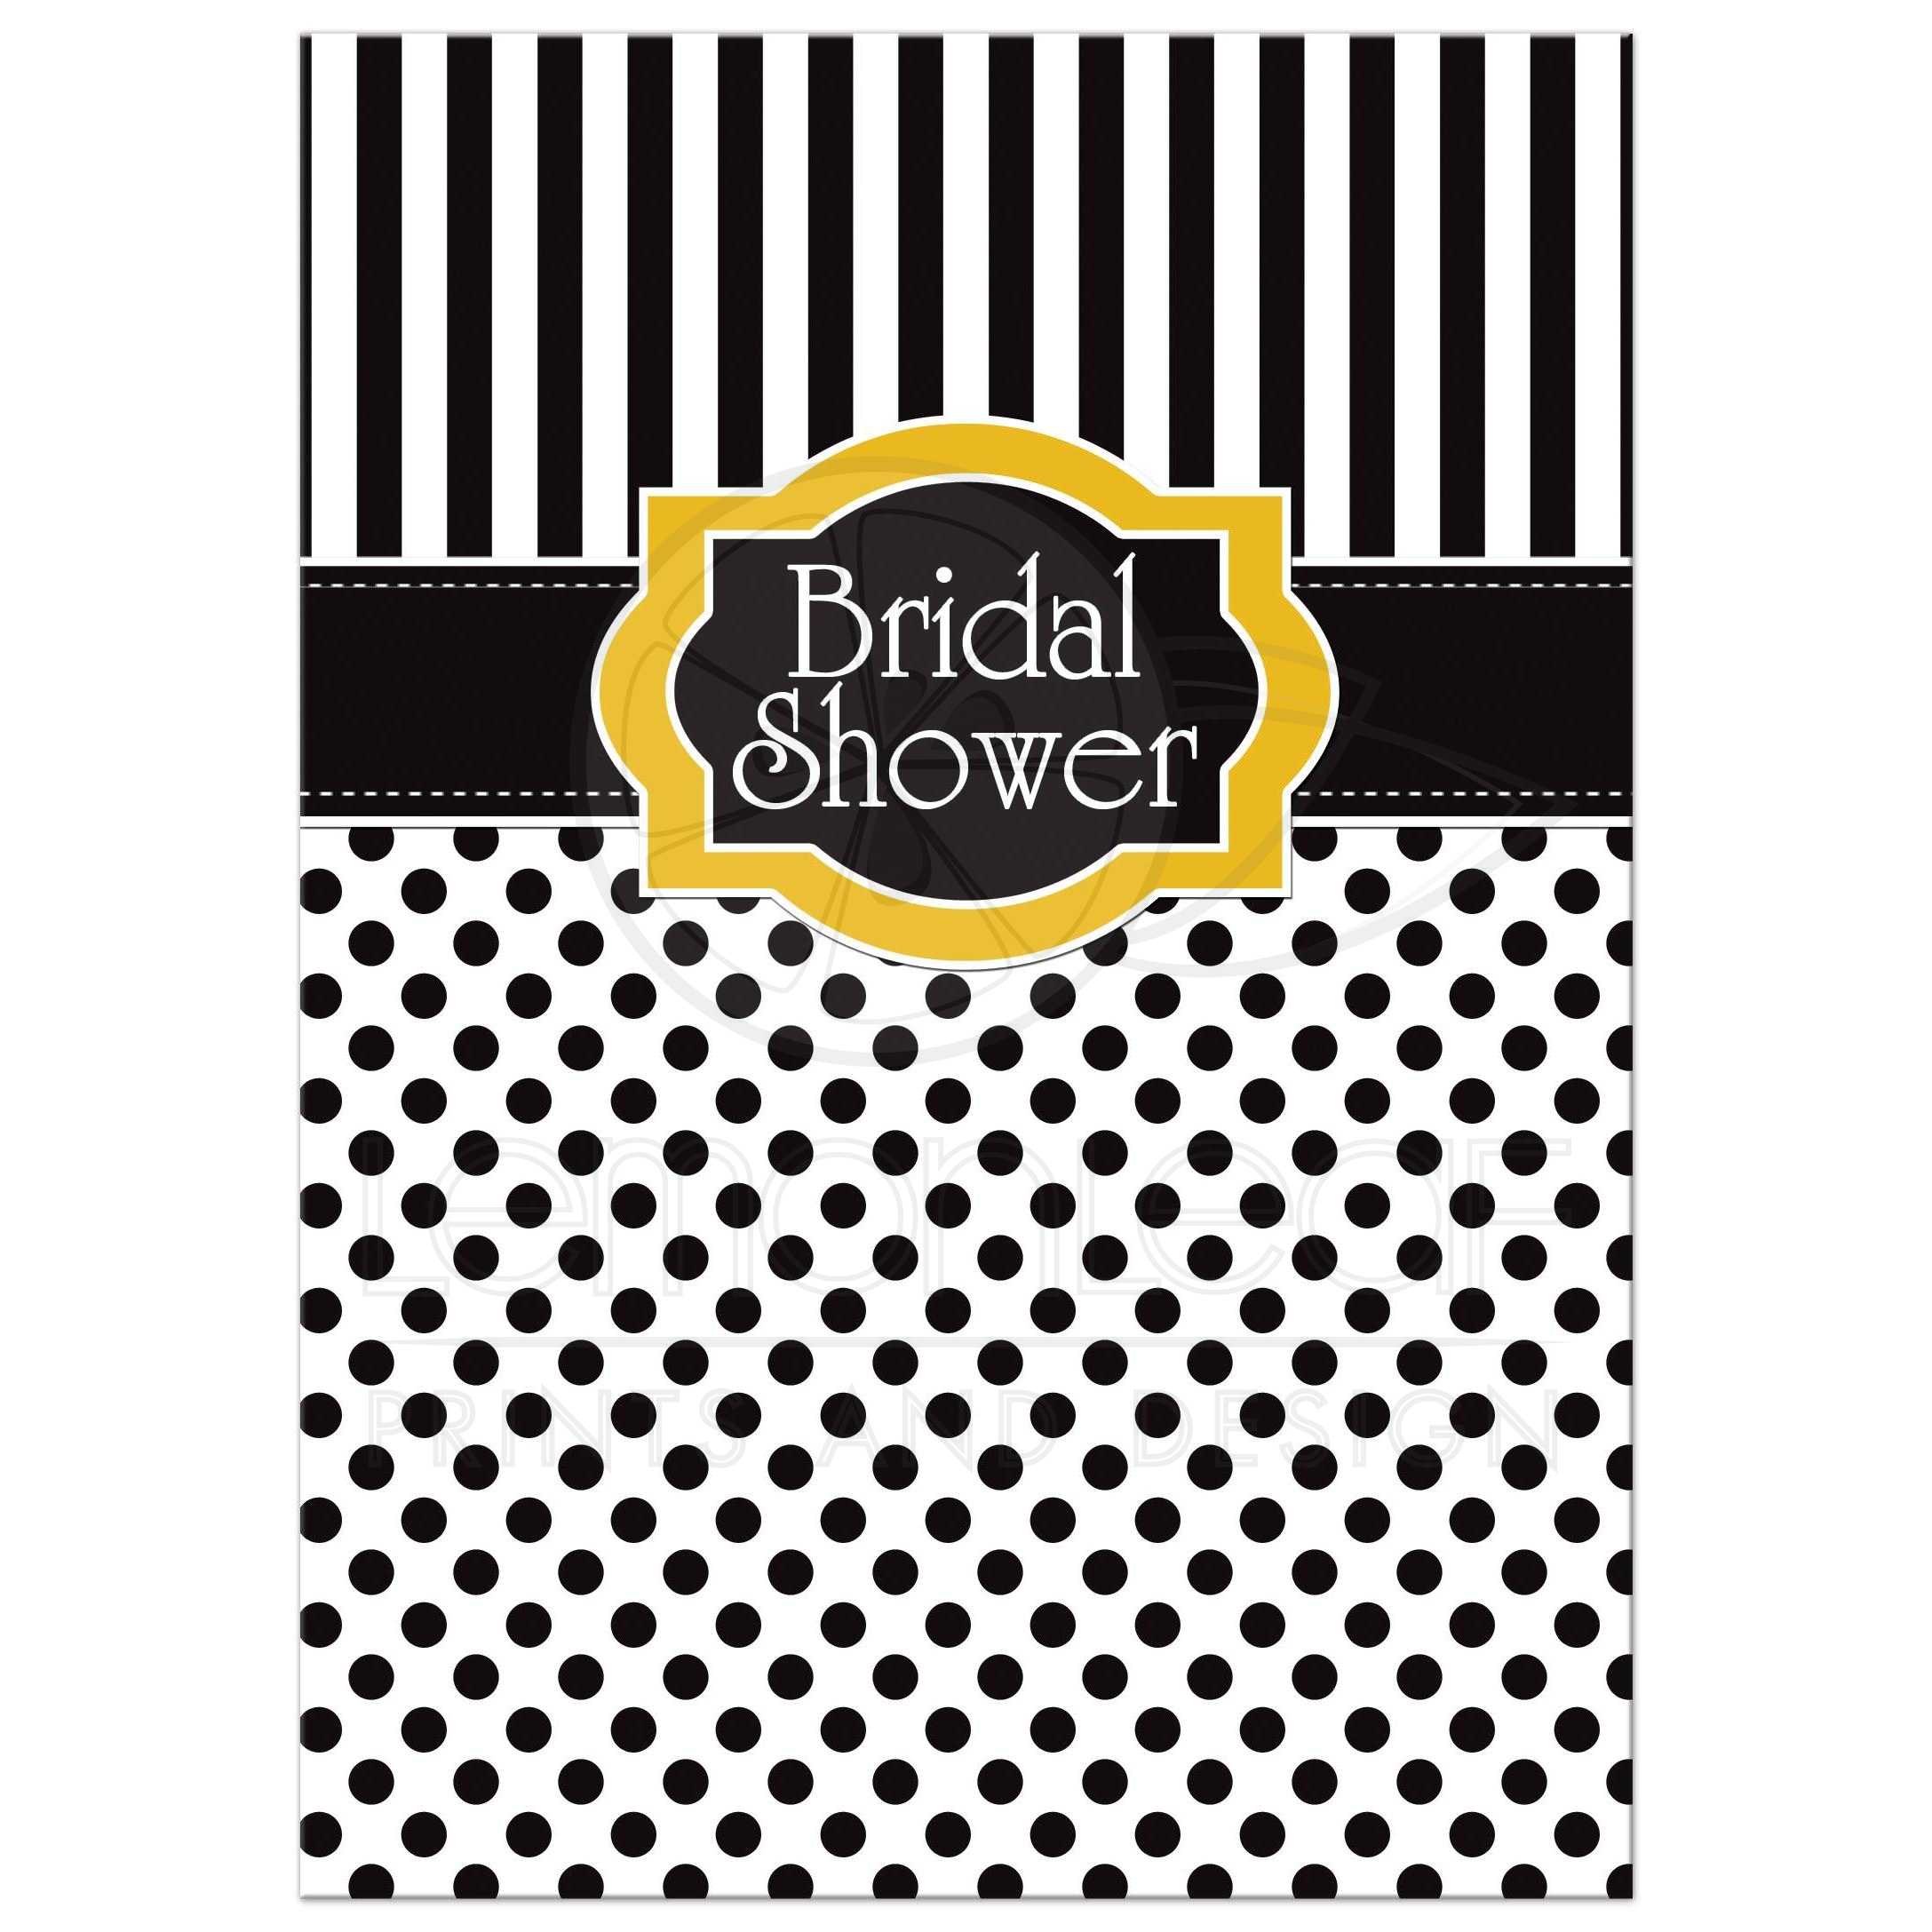 Black with a Dot of Yellow I Logo - Bridal Shower Invitation | Black, White, Yellow | Polka Dots and Stripes